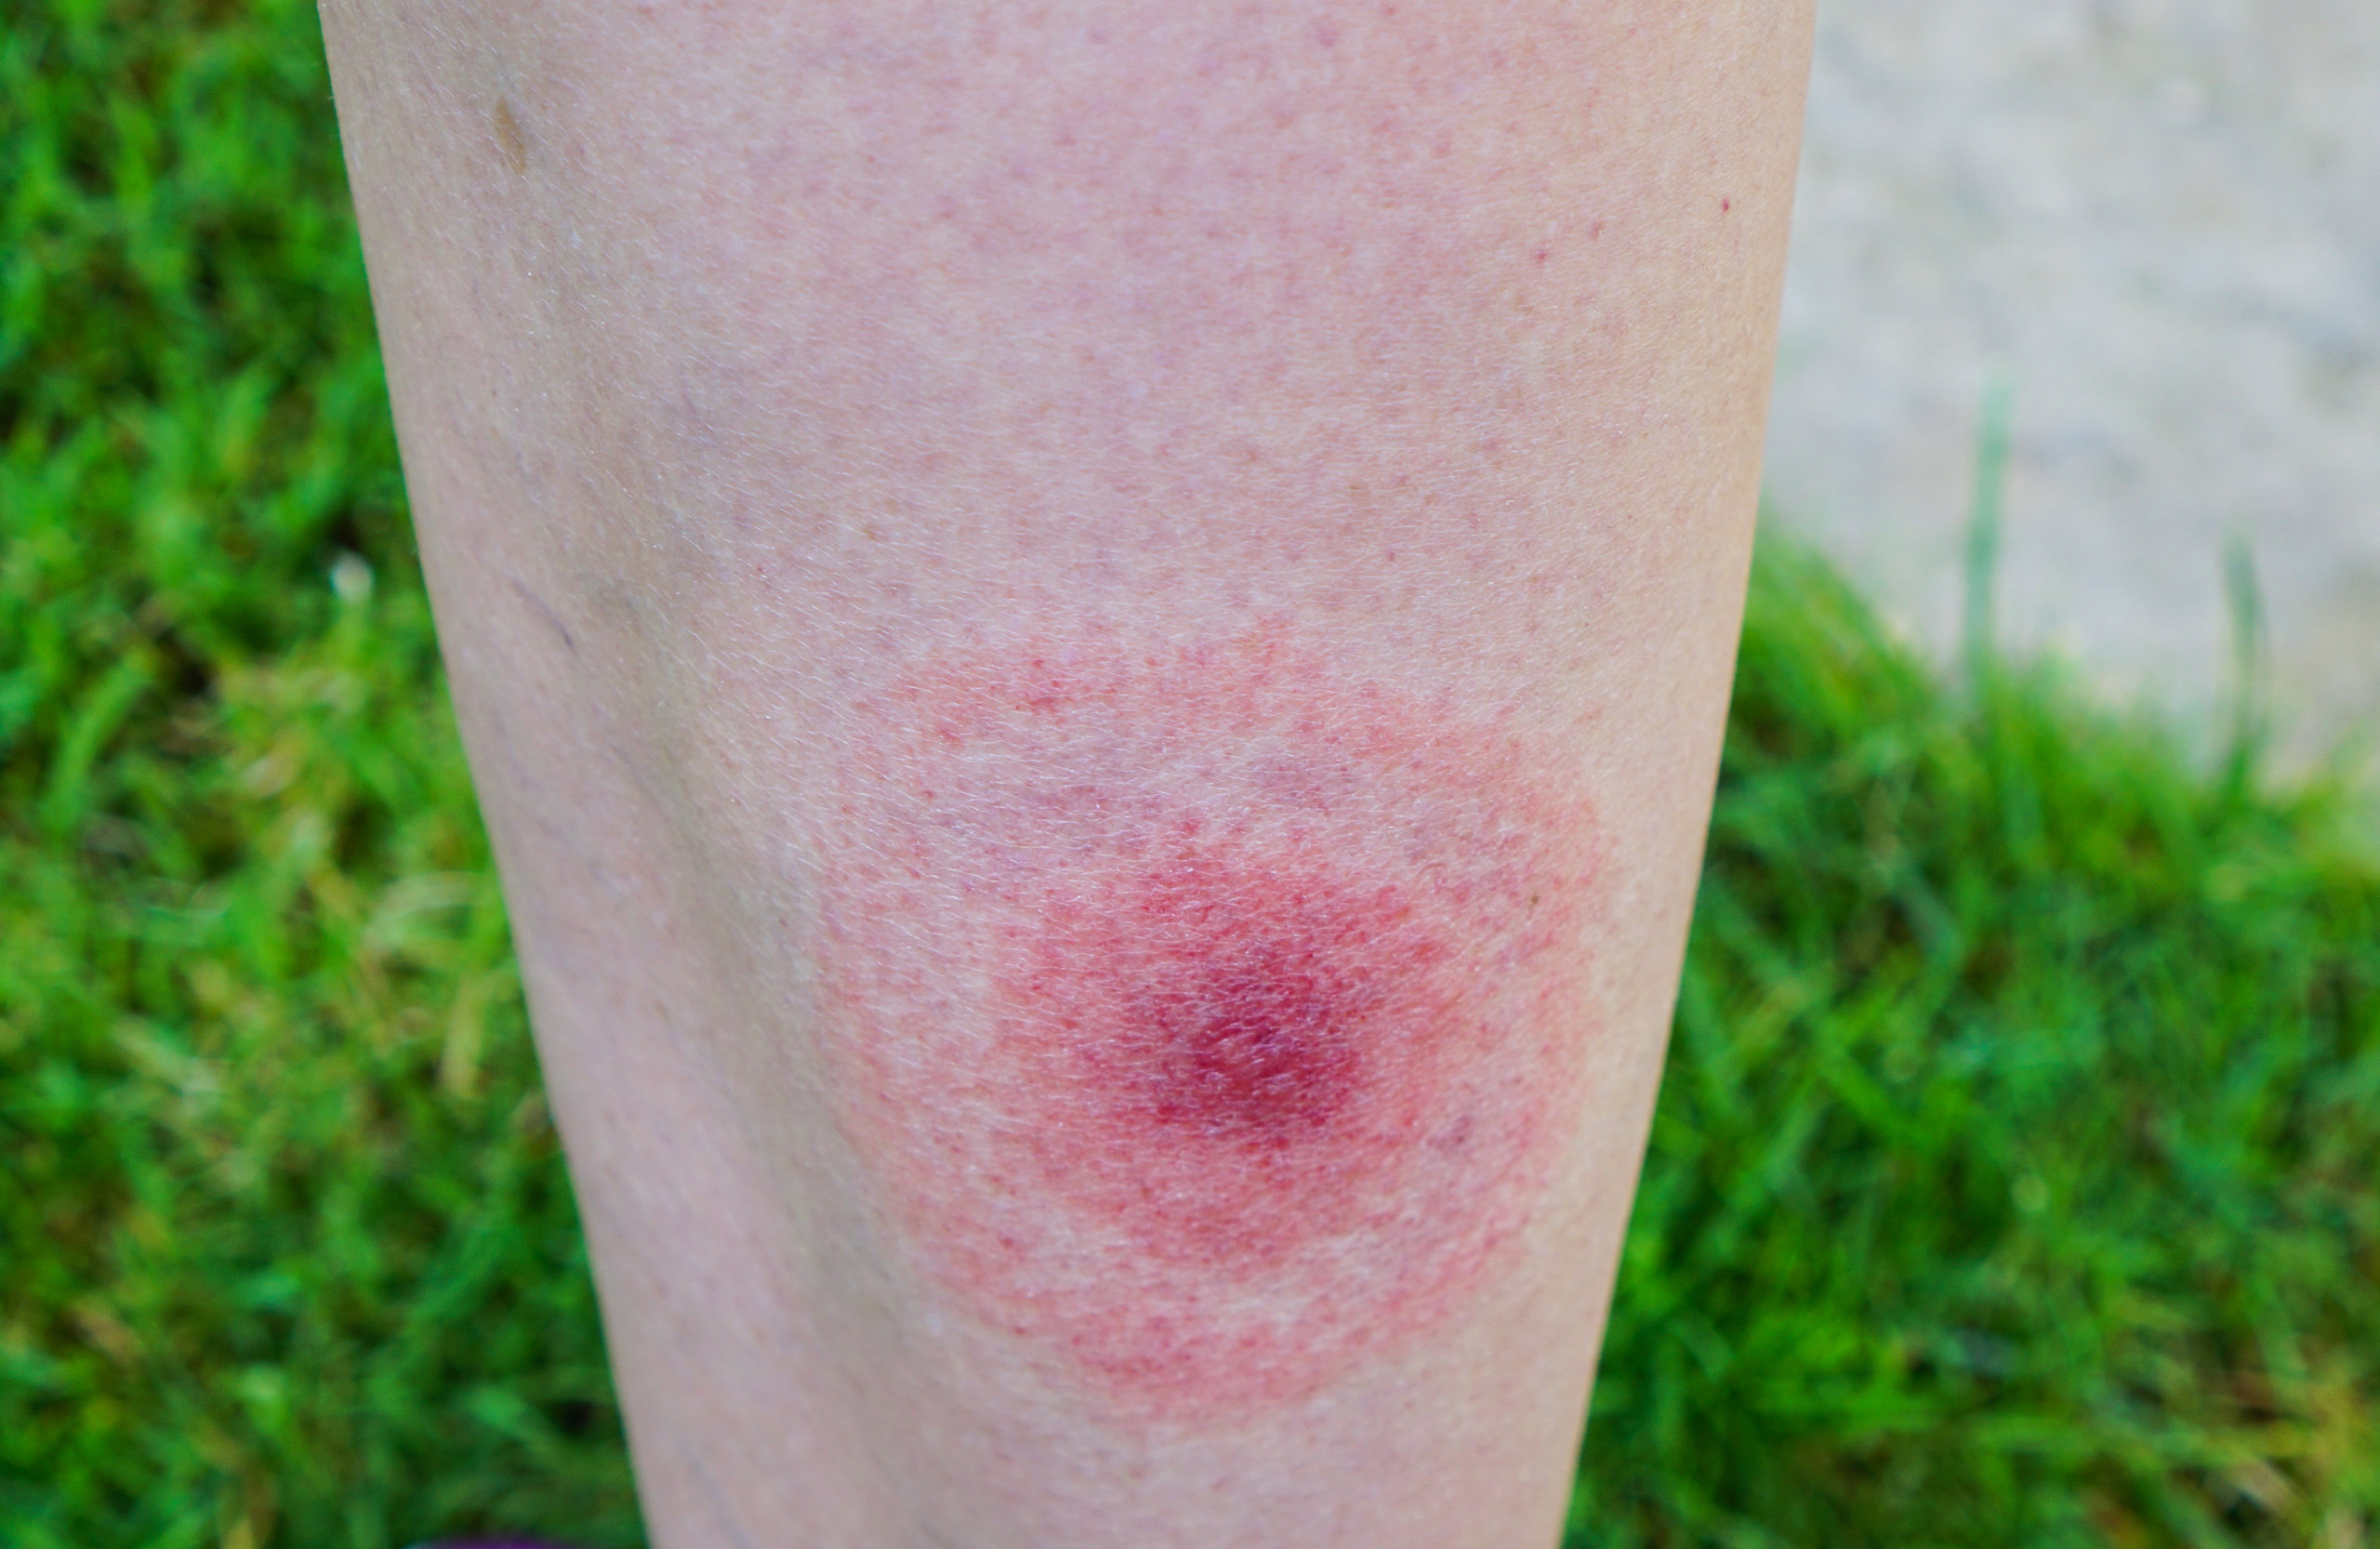 A classic Lyme disease "bullseye" rash, which is not as common as people might think